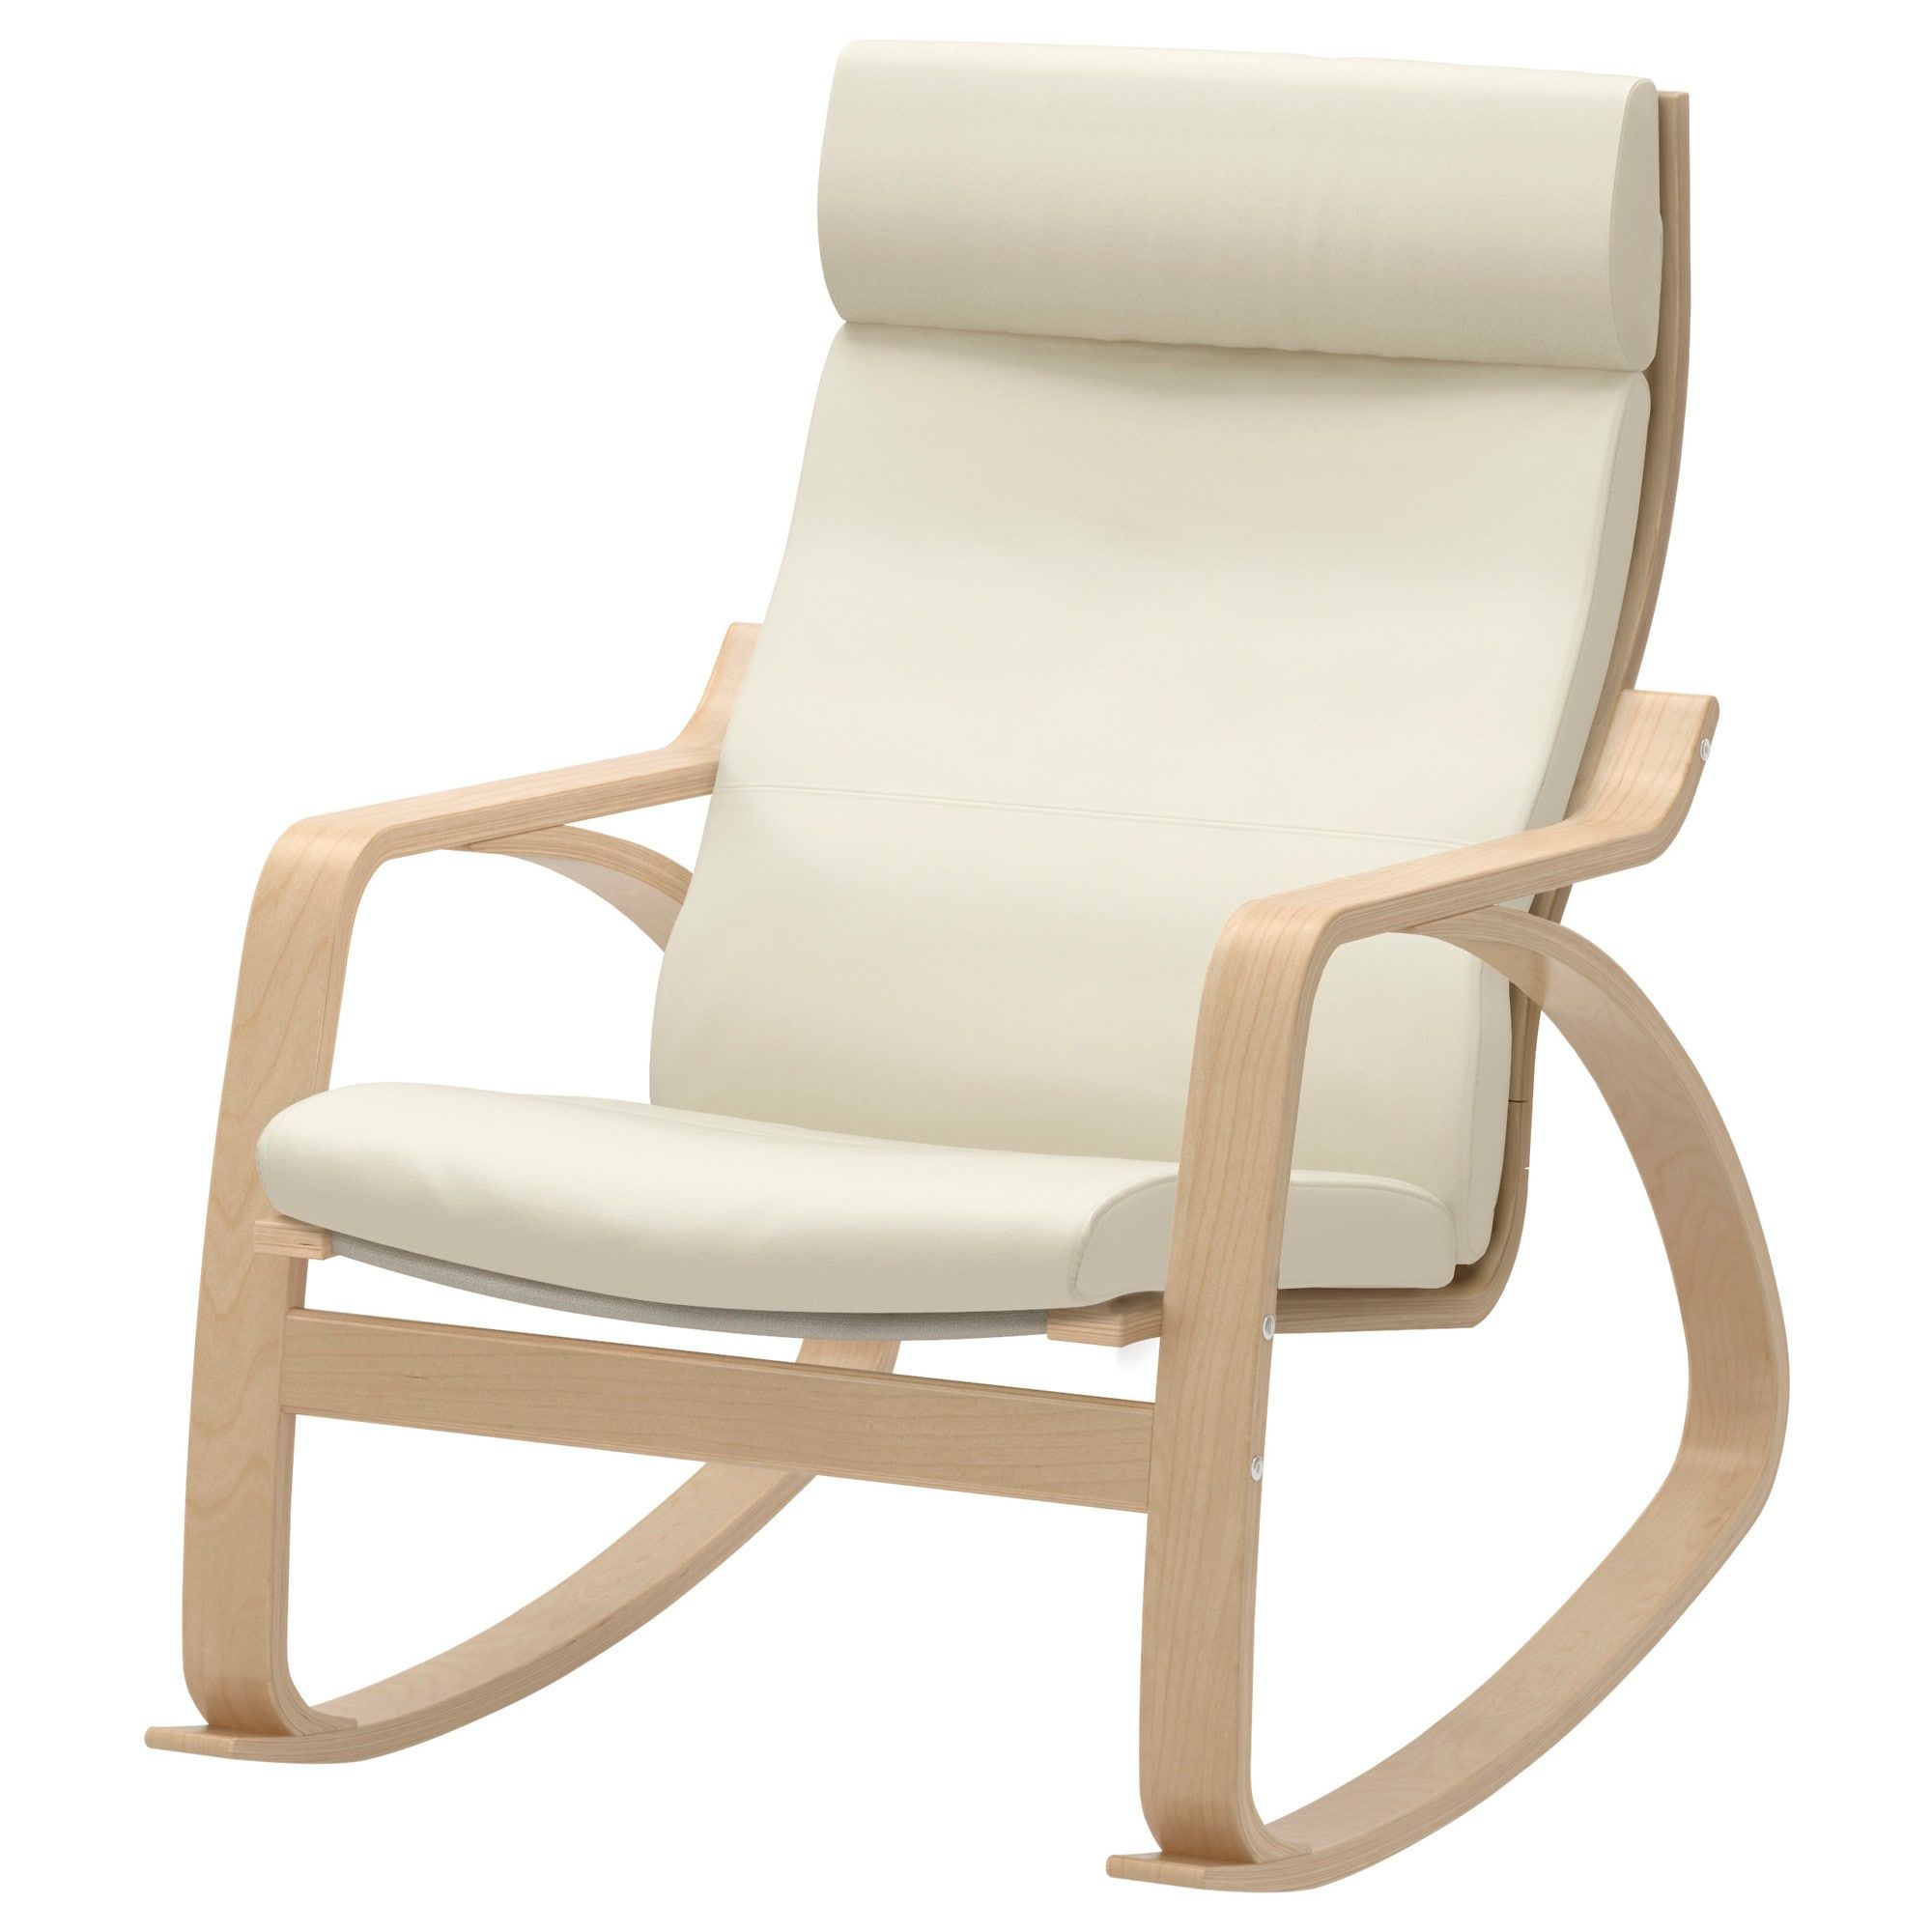 Rocking Chair Poäng Birch Veneer, Robust Glose Off White In Wooden Rocking Chairs With Fabric Upholstered Cushions, White (View 11 of 20)